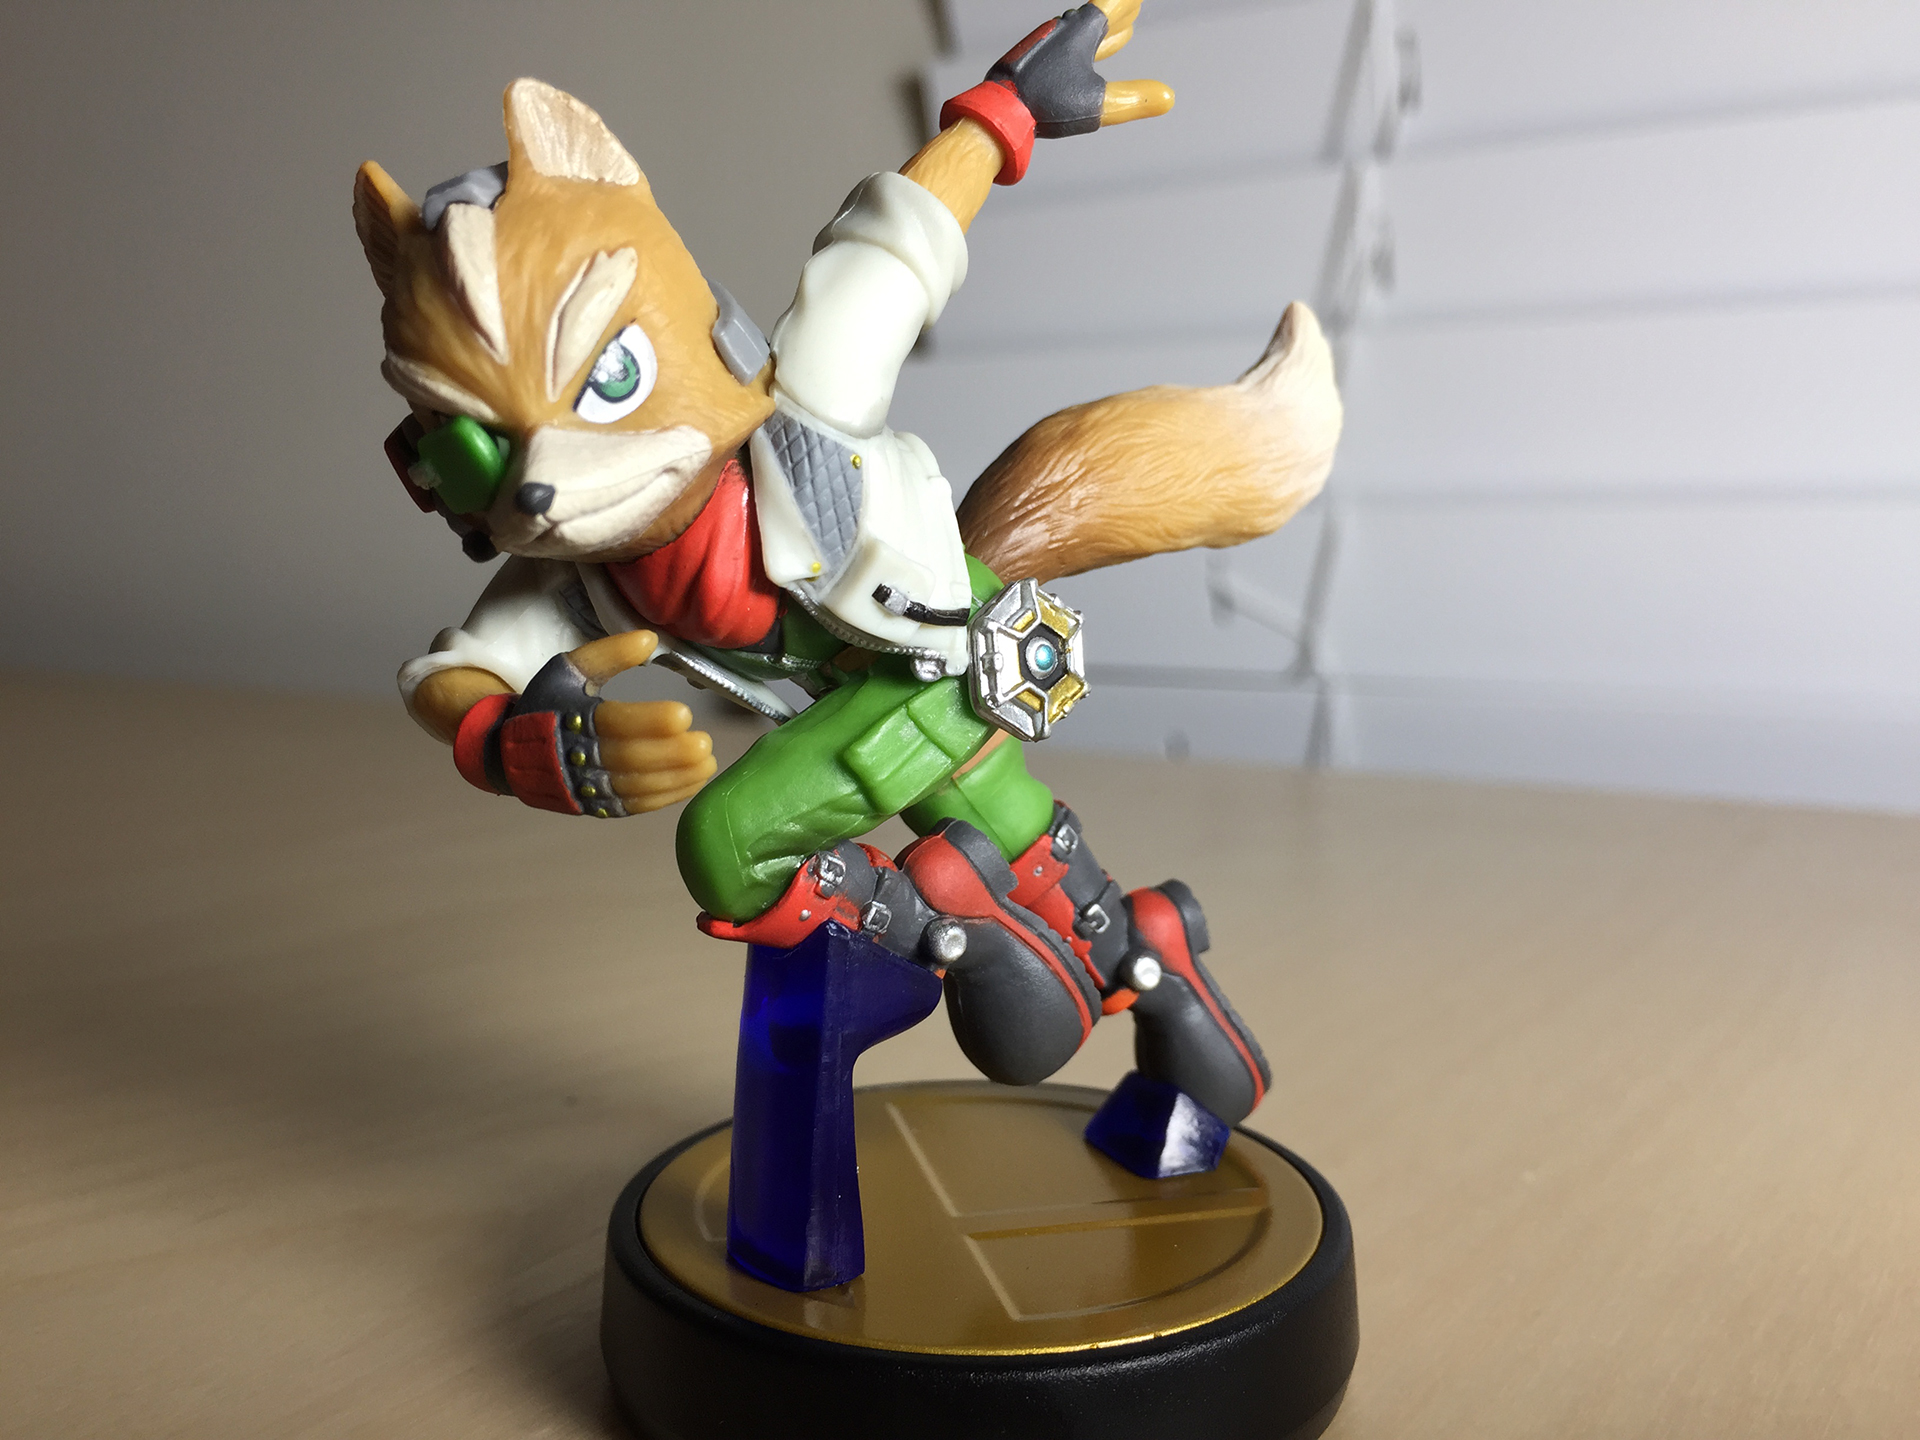 Up Close And Personal With Nintendo’s Amiibo Figures